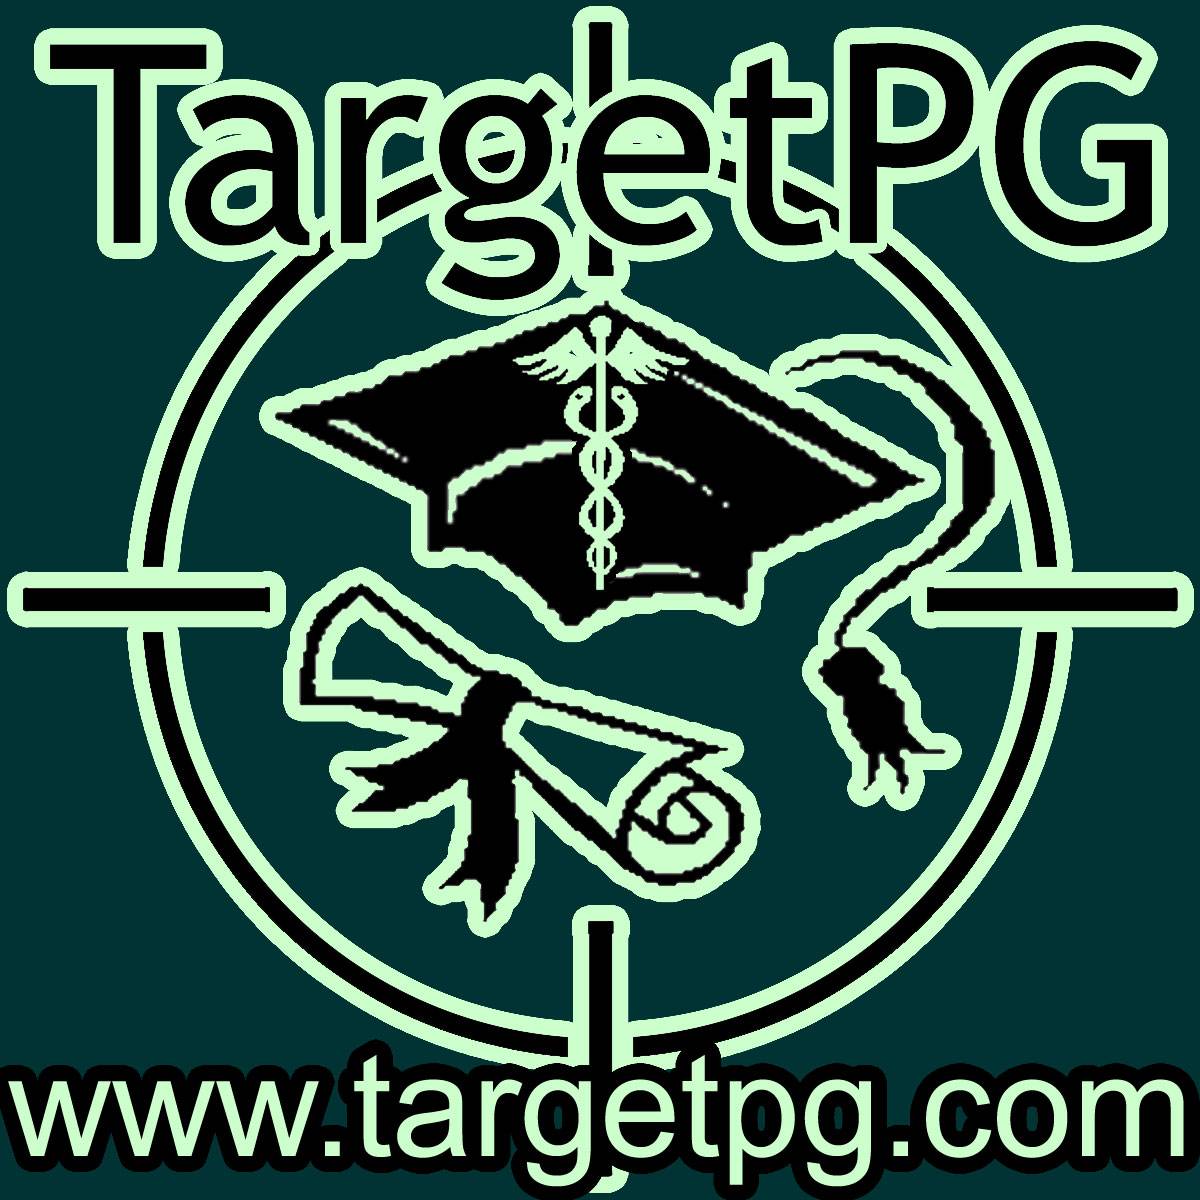 TARGETPG TARGET PROFESSIONAL GROWTH / POST GRADUATION - A HELPING HAND TO THE HANDS THAT HEAL